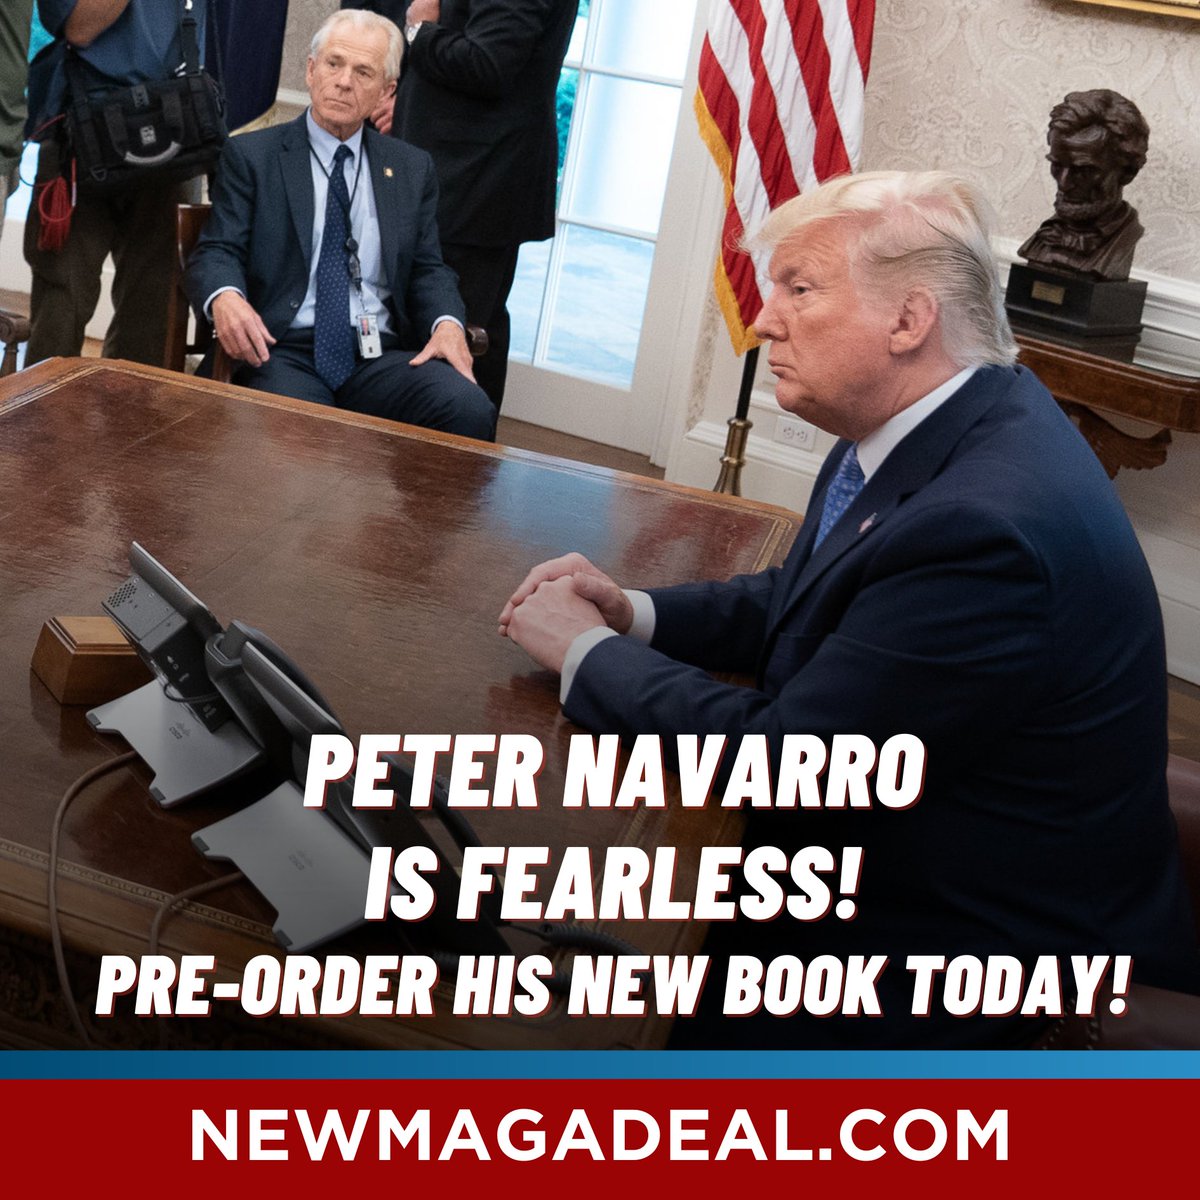 Peter Navarro is fearless! Pre-order his new book today at NEWMAGADEAL.com!